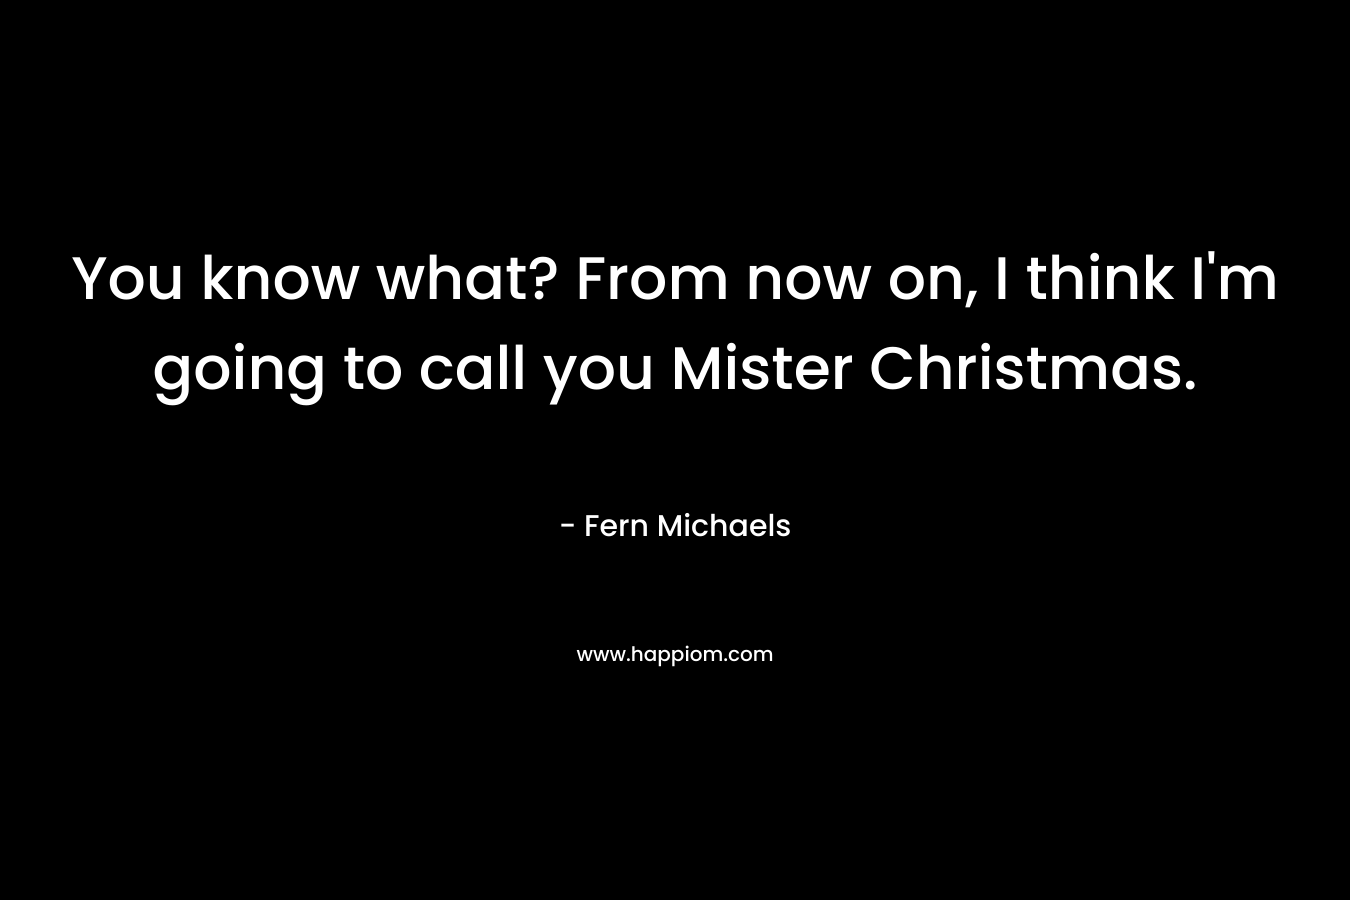 You know what? From now on, I think I’m going to call you Mister Christmas. – Fern Michaels